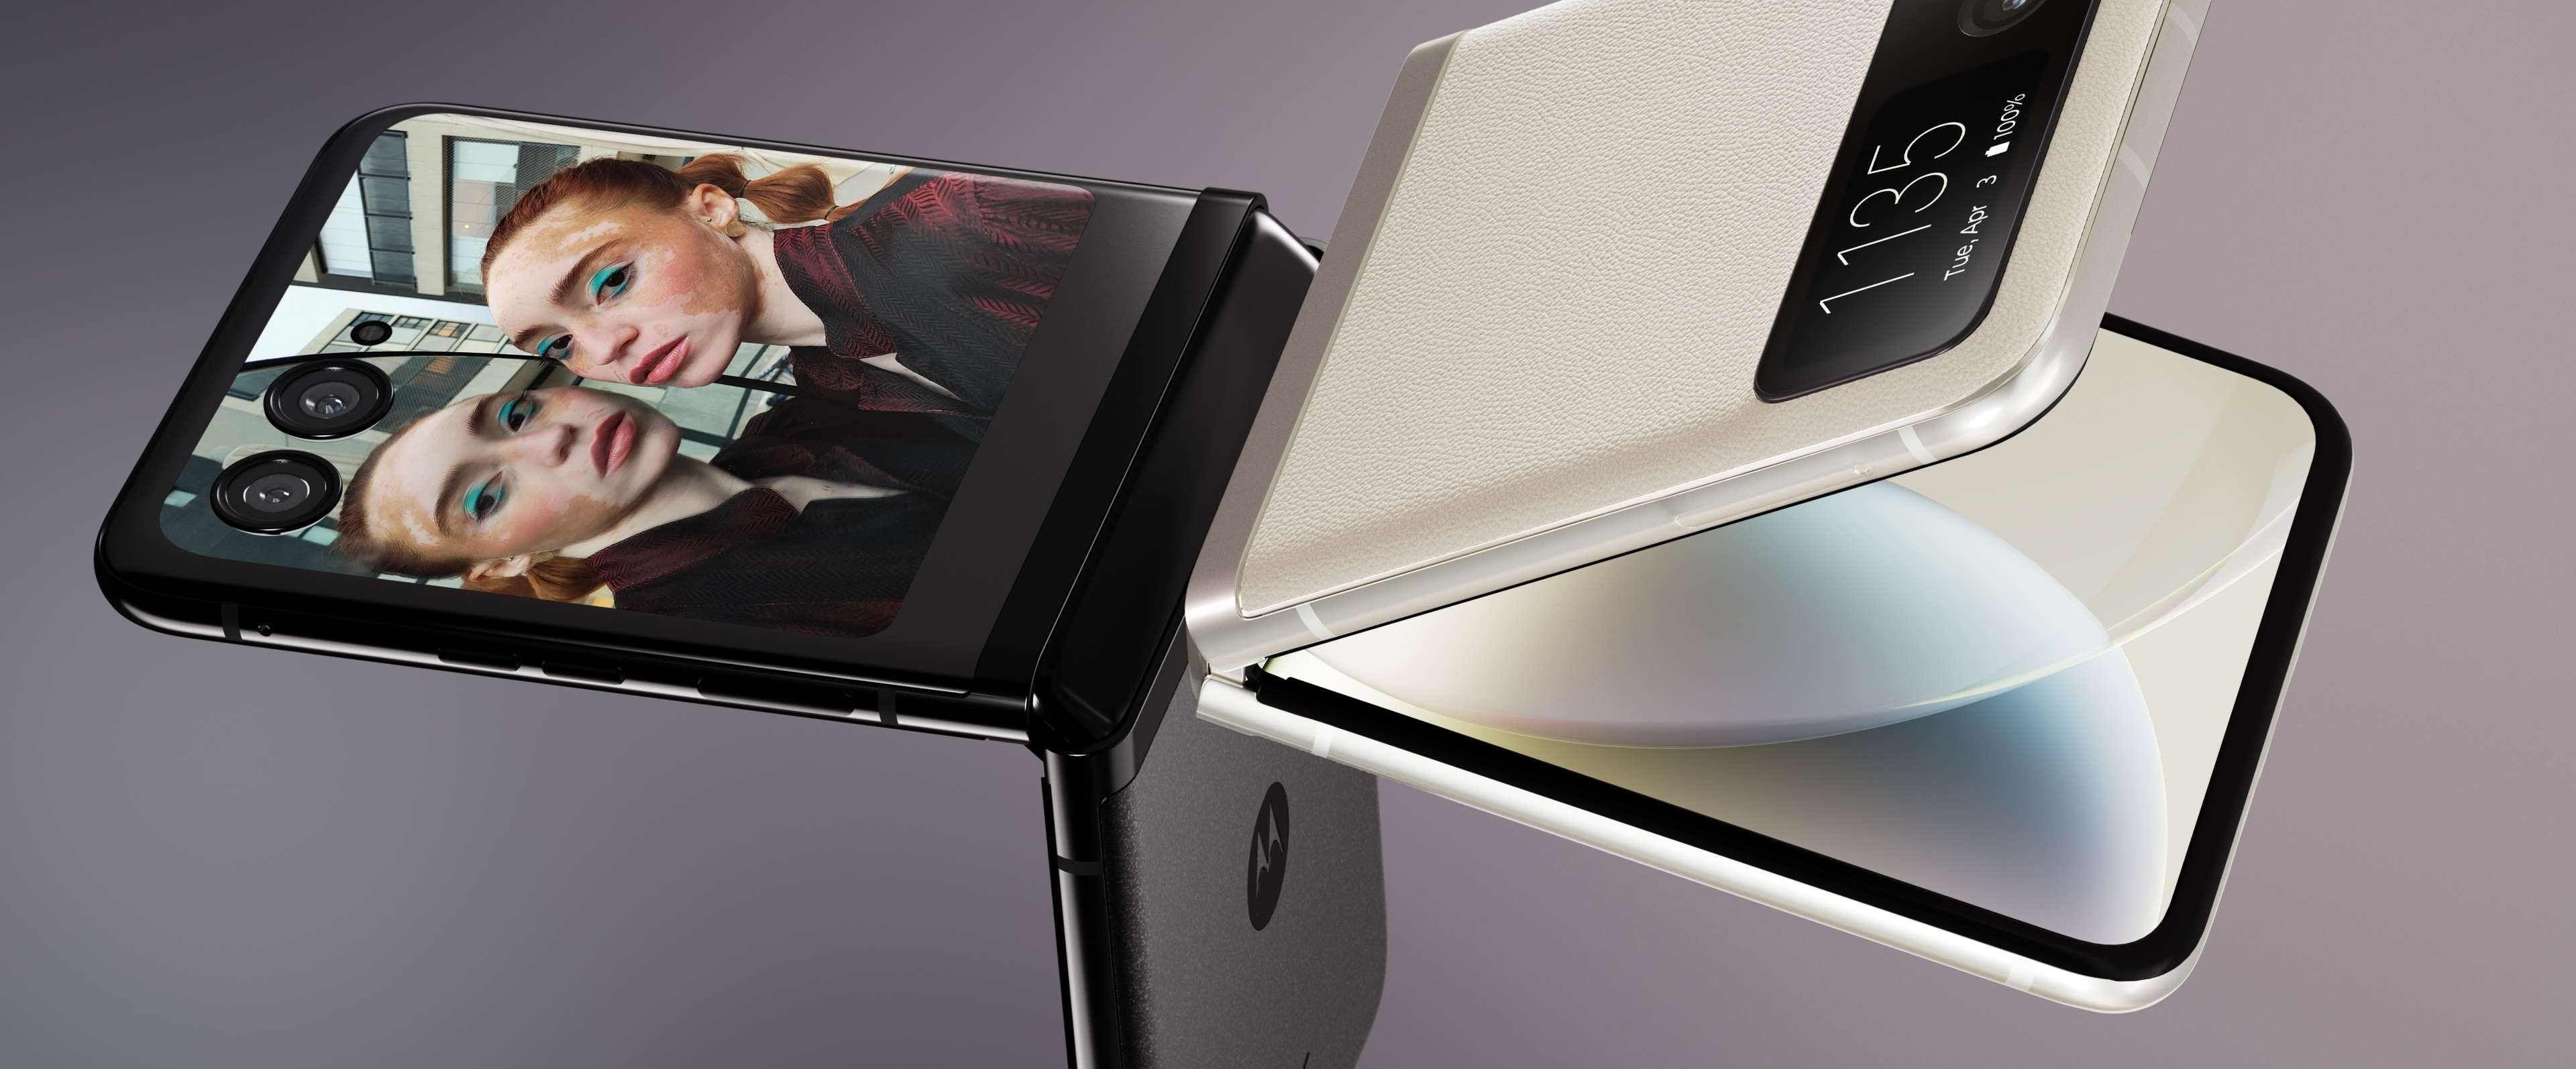 Motorola Razr 40 goes on sale in China as the most affordable flip